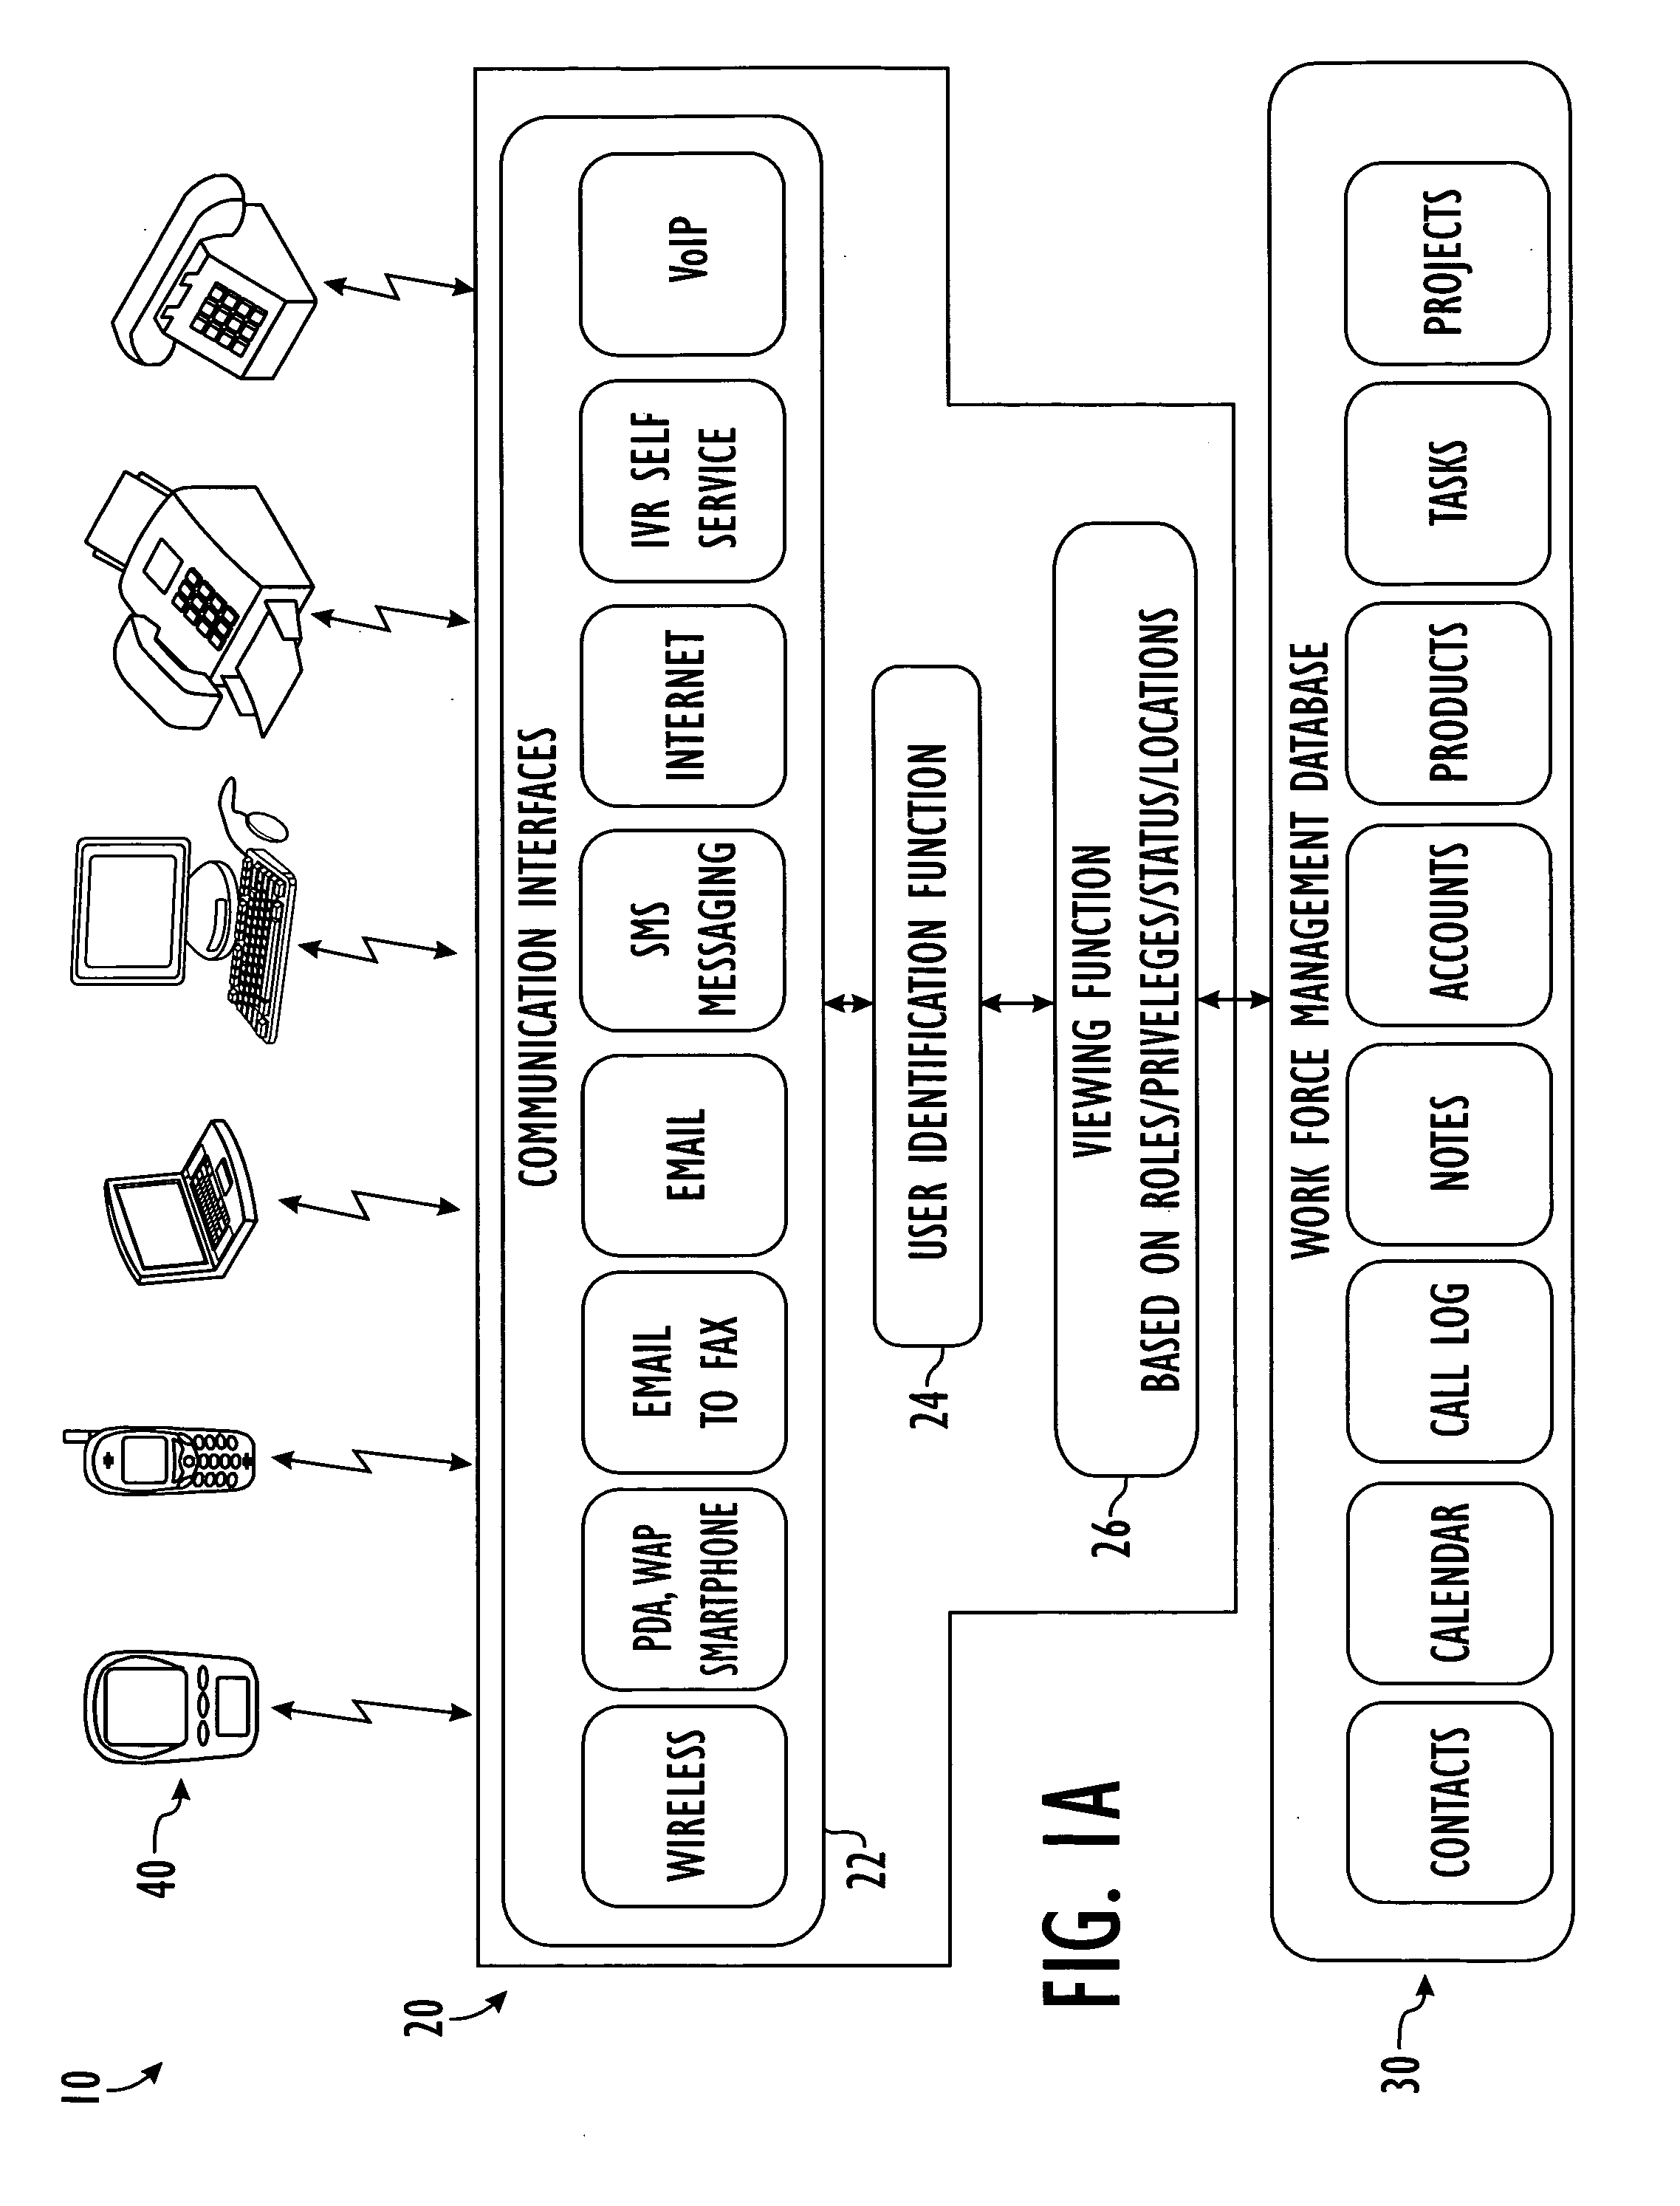 System and method for accessing data via Internet, wireless PDA, smartphone, text to voice and voice to text